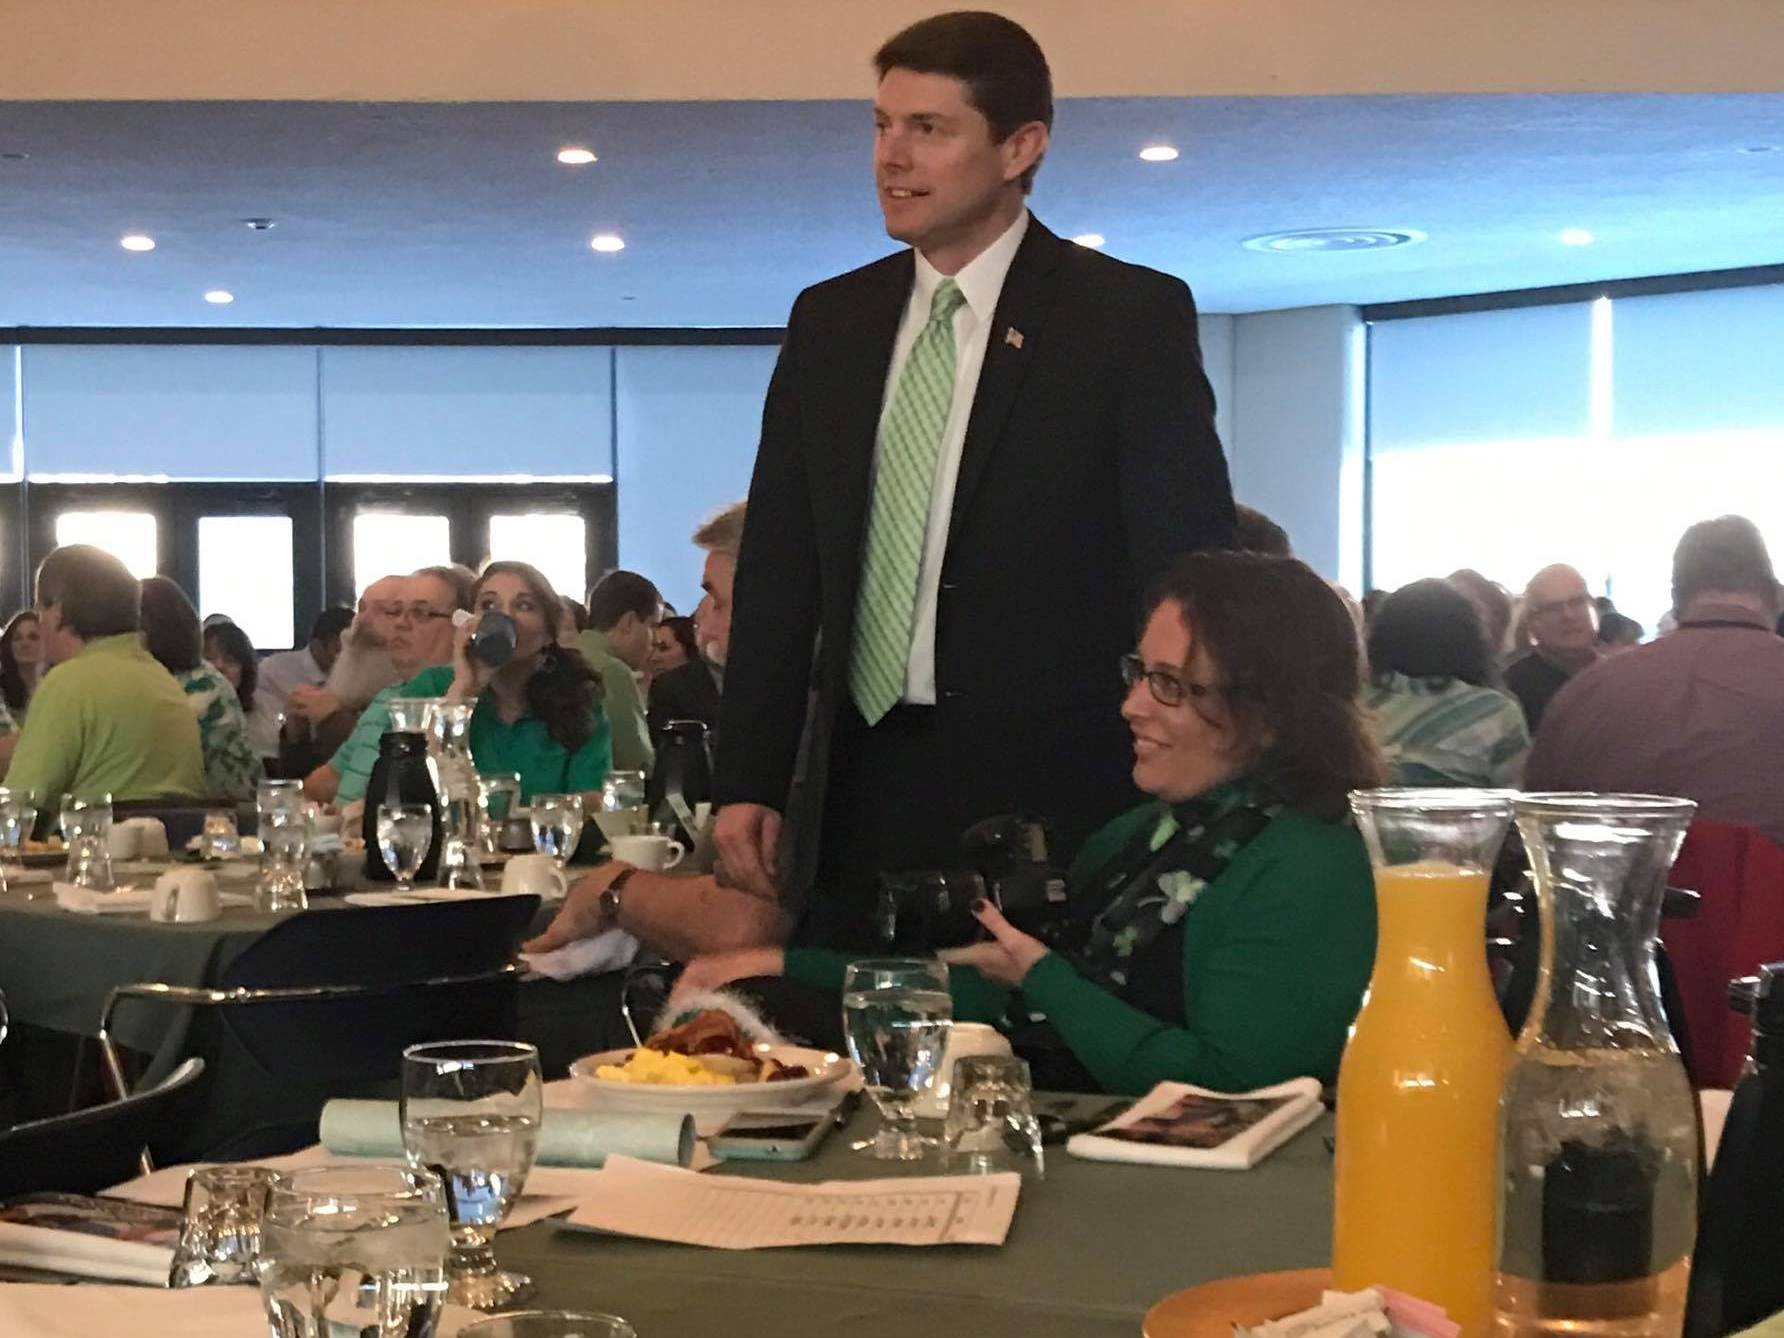 In March 2017, Assemblyman Jones attended the North Country Chamber of Commerce's 59th Annual St. Patrick's Day Breakfast.